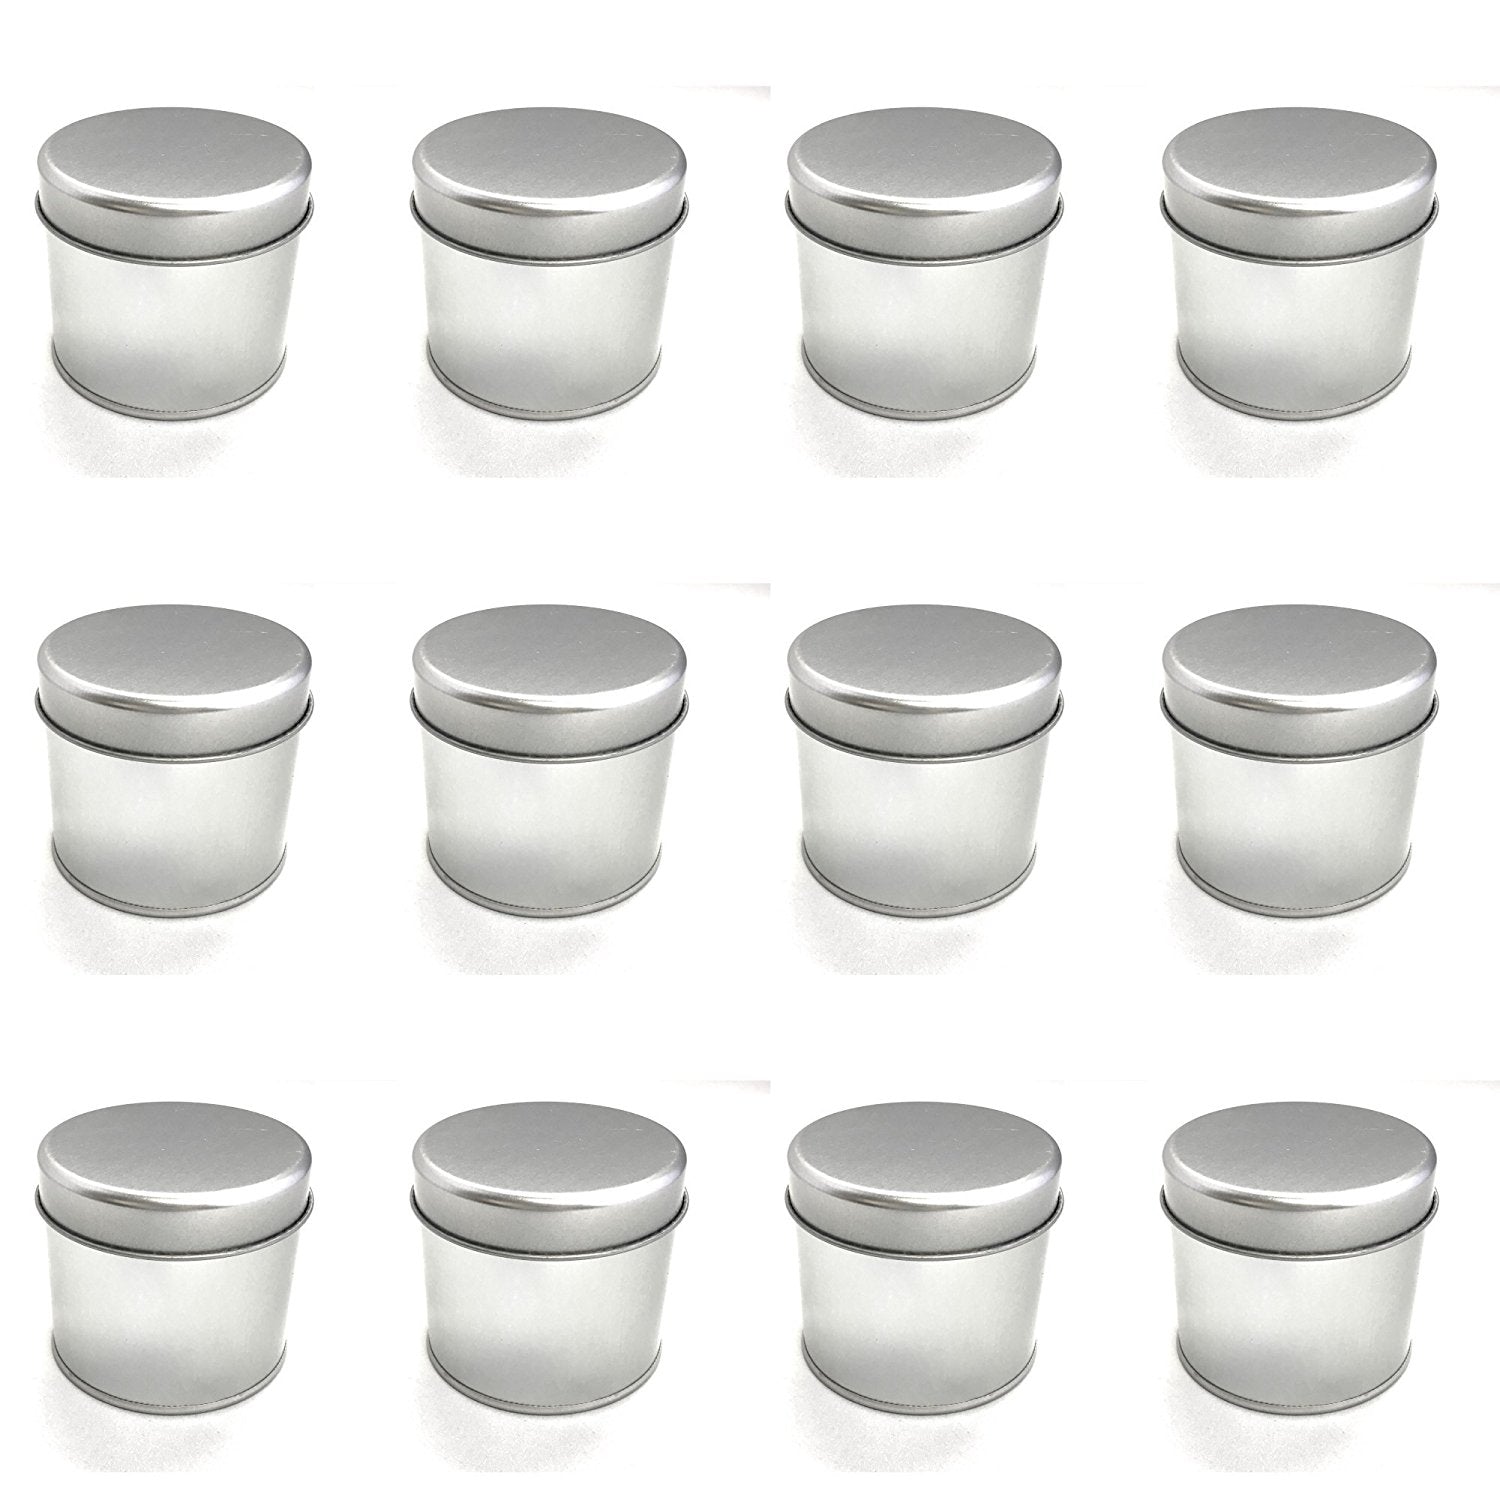 Tin Cans, 12 Pack – Large (8 oz) – 3” x 2.6” - RingBinderDepot.com